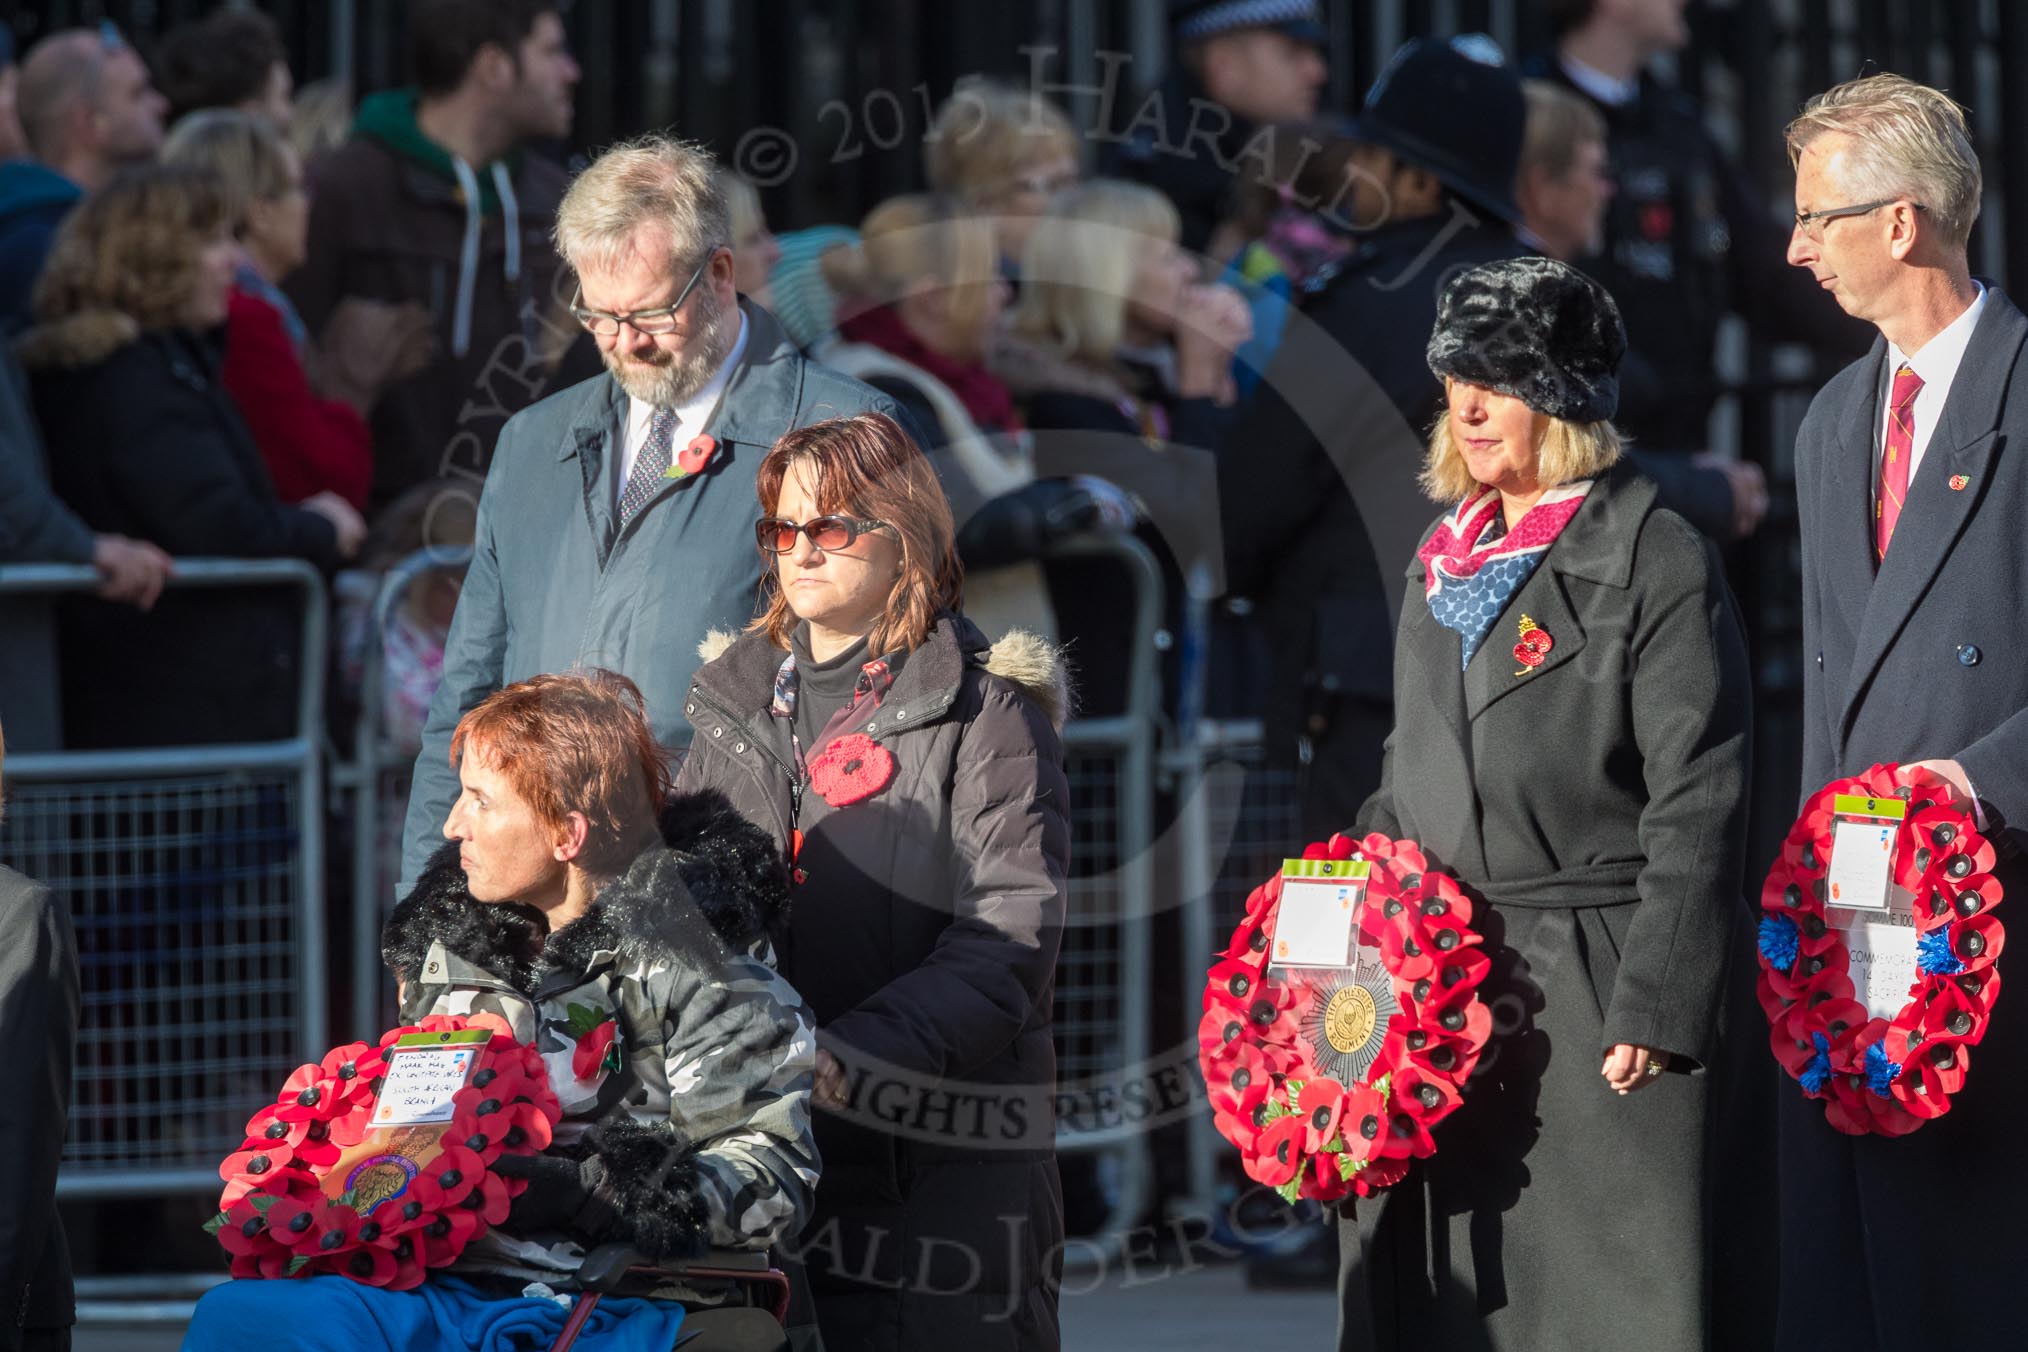 March Past, Remembrance Sunday at the Cenotaph 2016: M22 The Royal British Legion - Civilians.
Cenotaph, Whitehall, London SW1,
London,
Greater London,
United Kingdom,
on 13 November 2016 at 13:16, image #2677